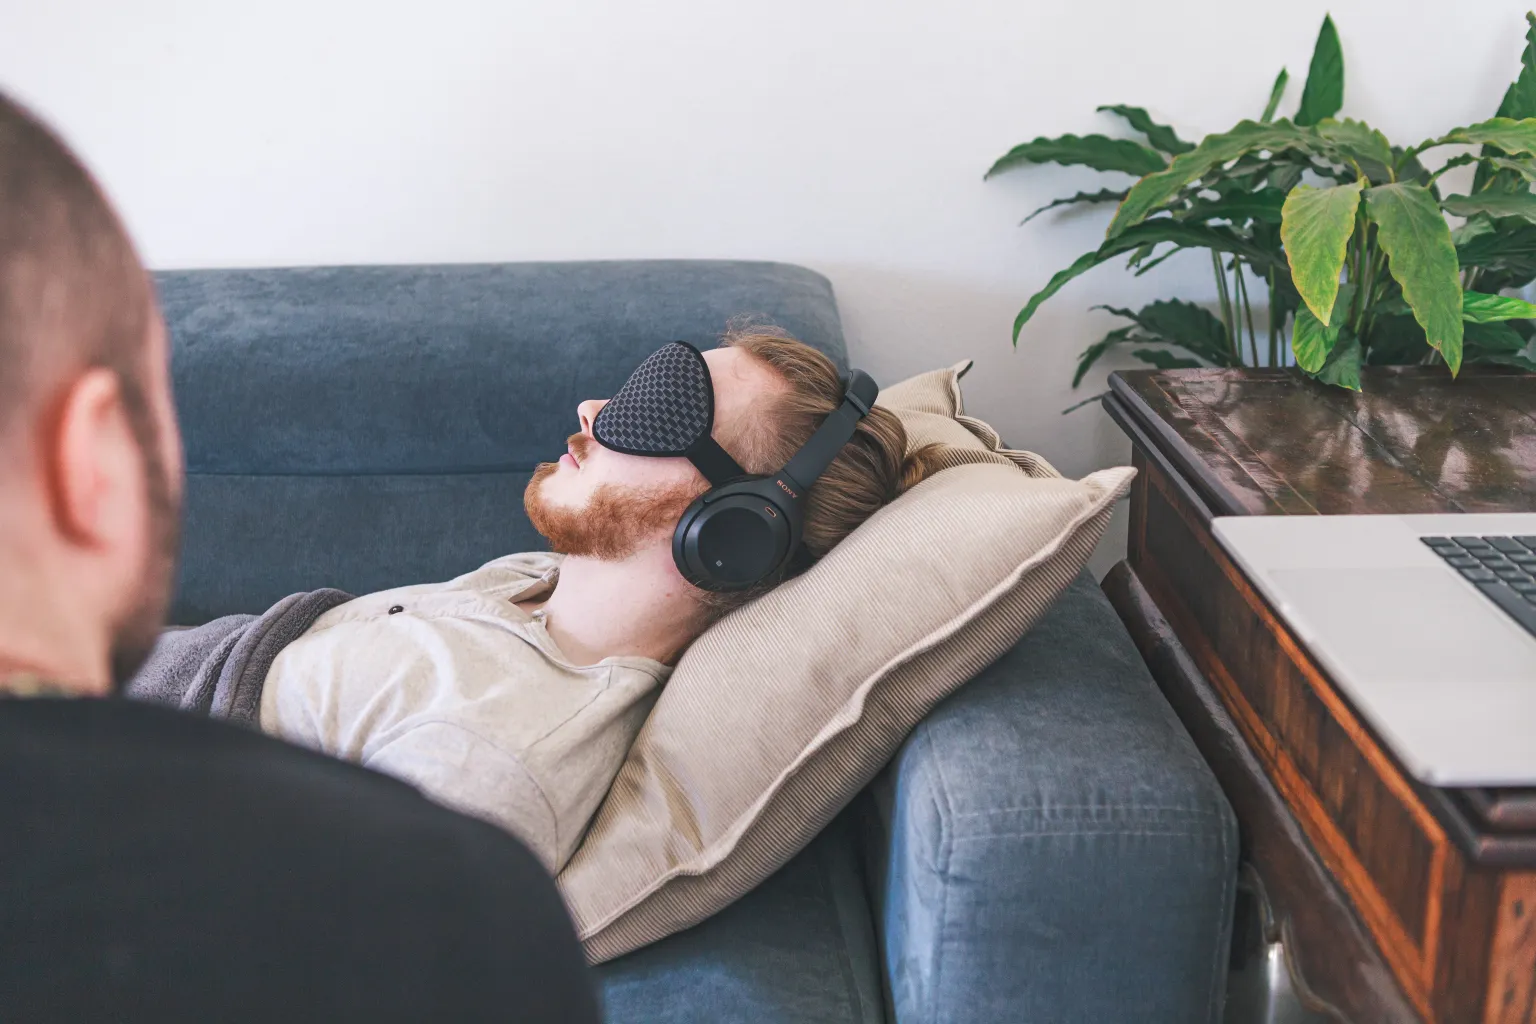 While wearing an eye mask, each individual listens to a series of carefully designed music programs and receives personalized support from a trained psychotherapist.